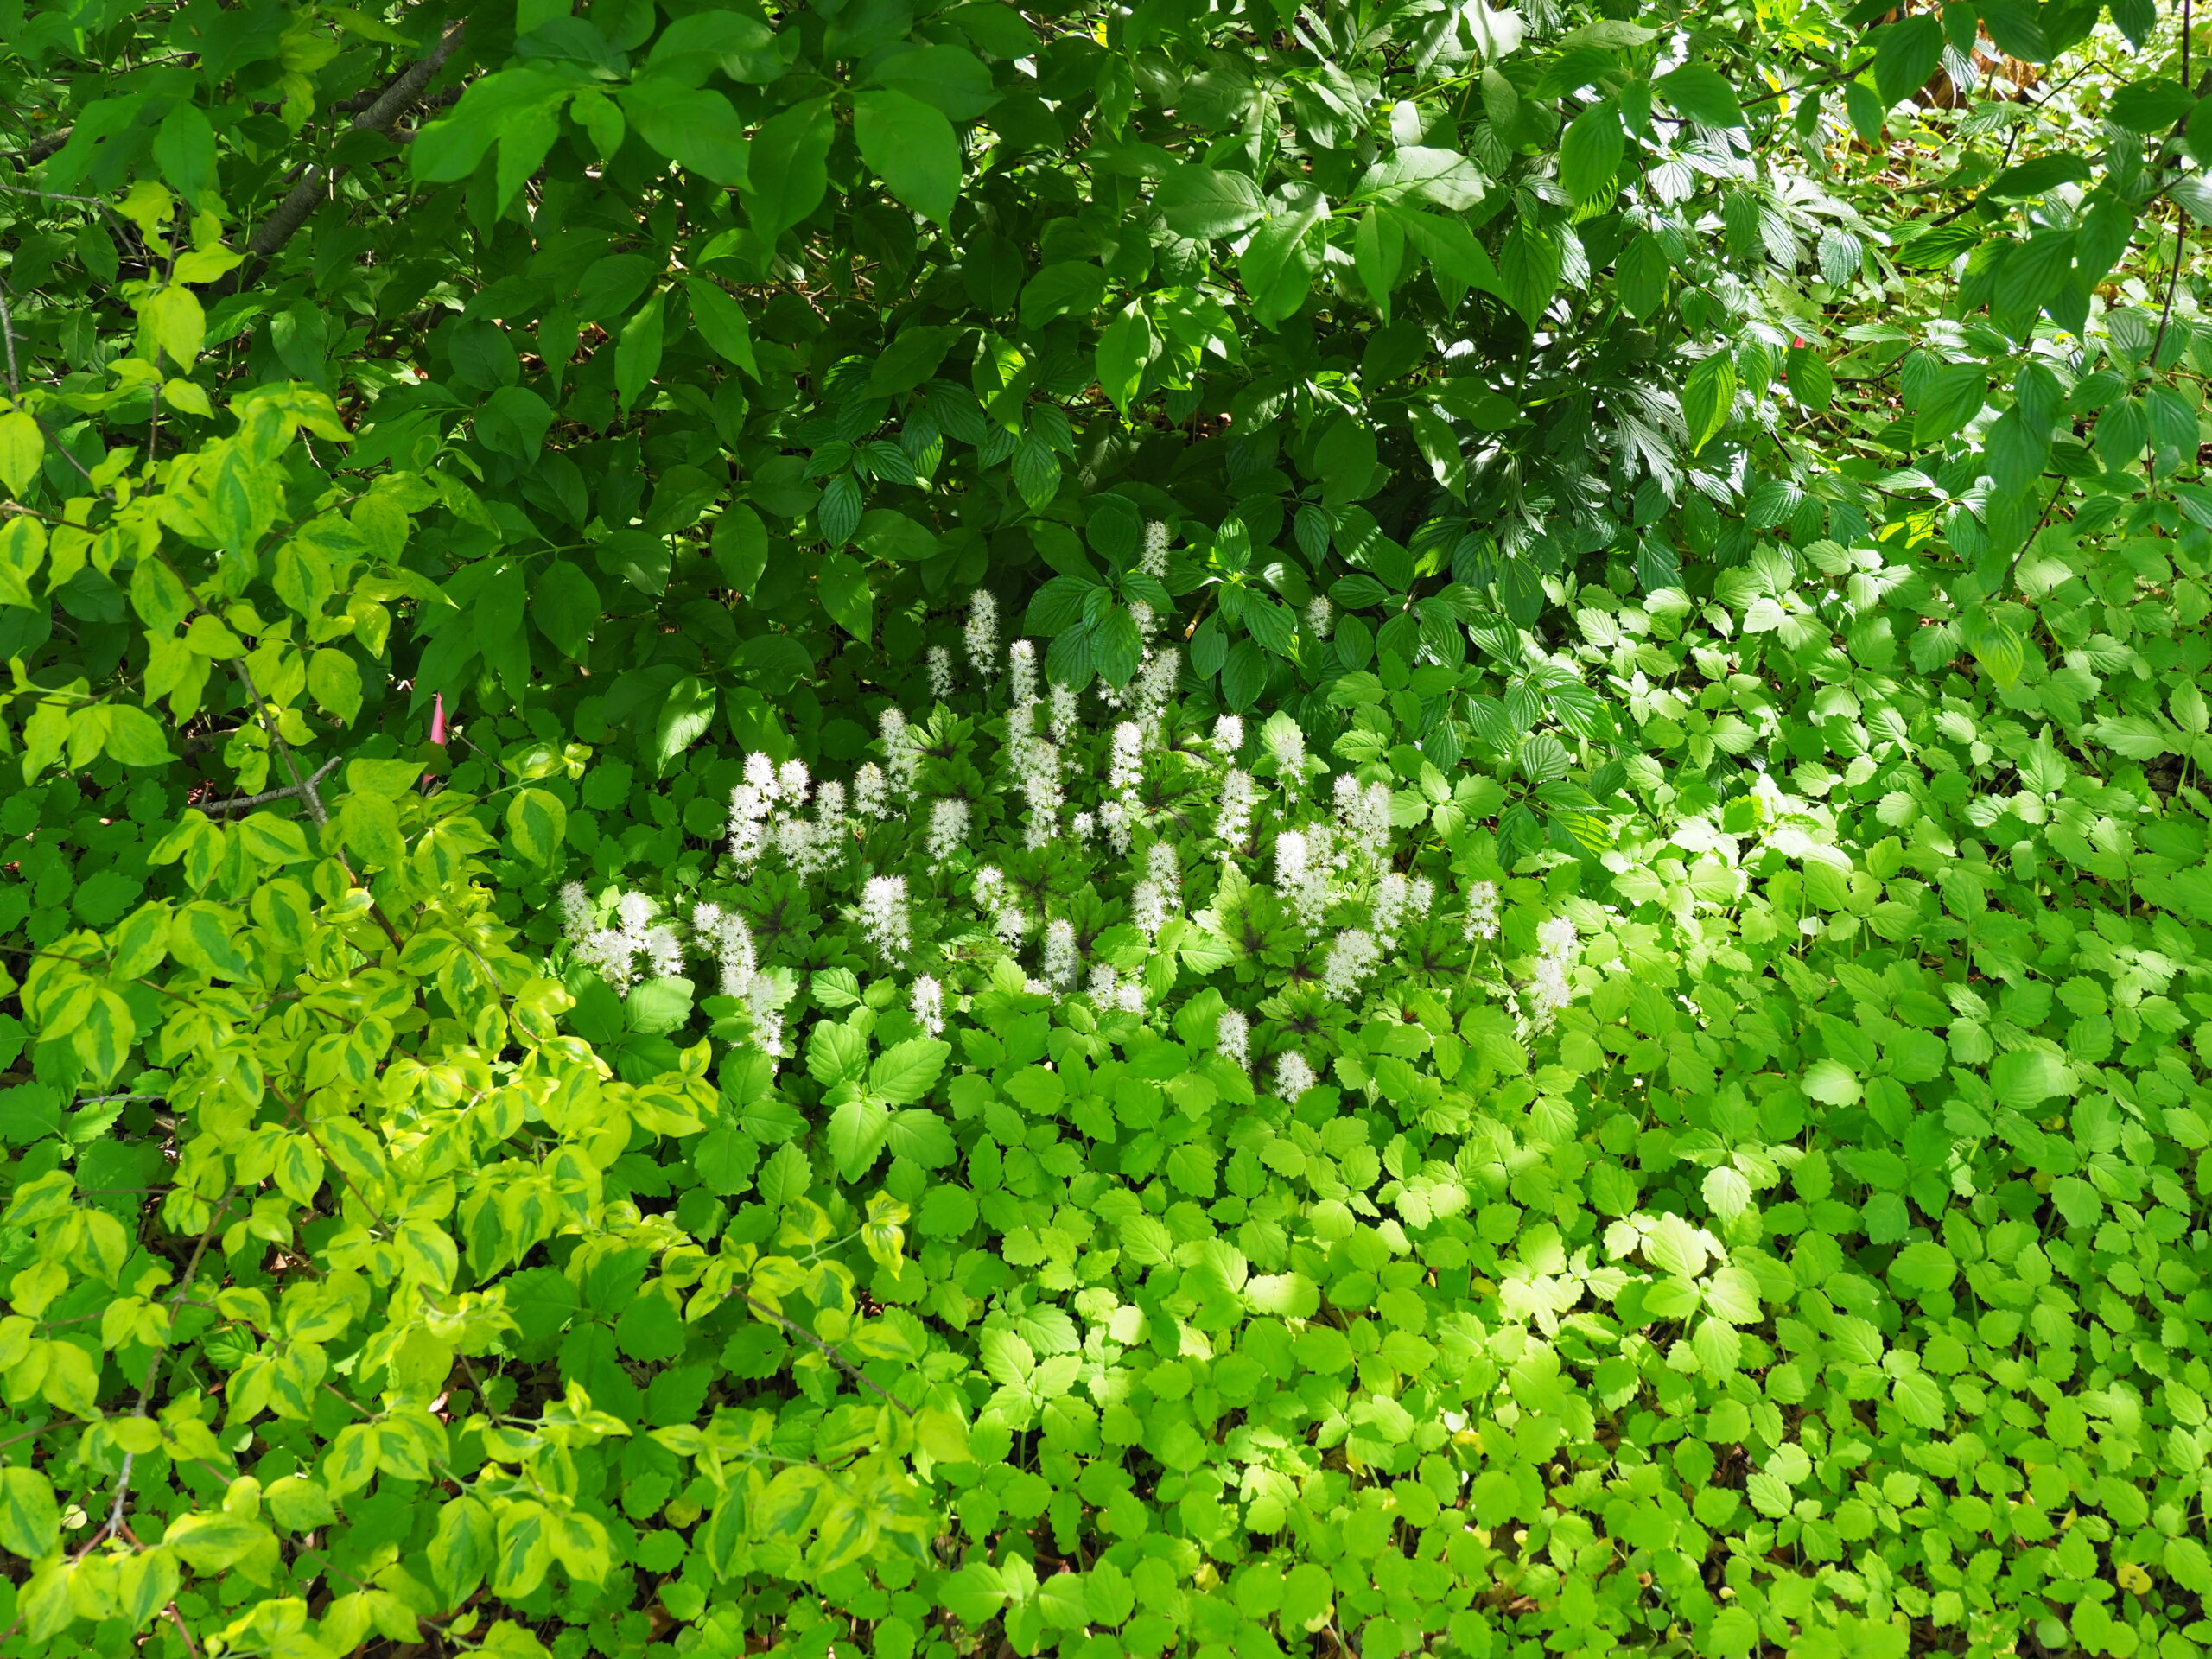 Tiarella, or the foam flower, (center) is a great understory planting for shady areas that remain somewhat moist. The species has white flowers but there are several introductions with pink to red flowers and magnificently colored foliage that thrives in shade.  ANDREW MESSINGER